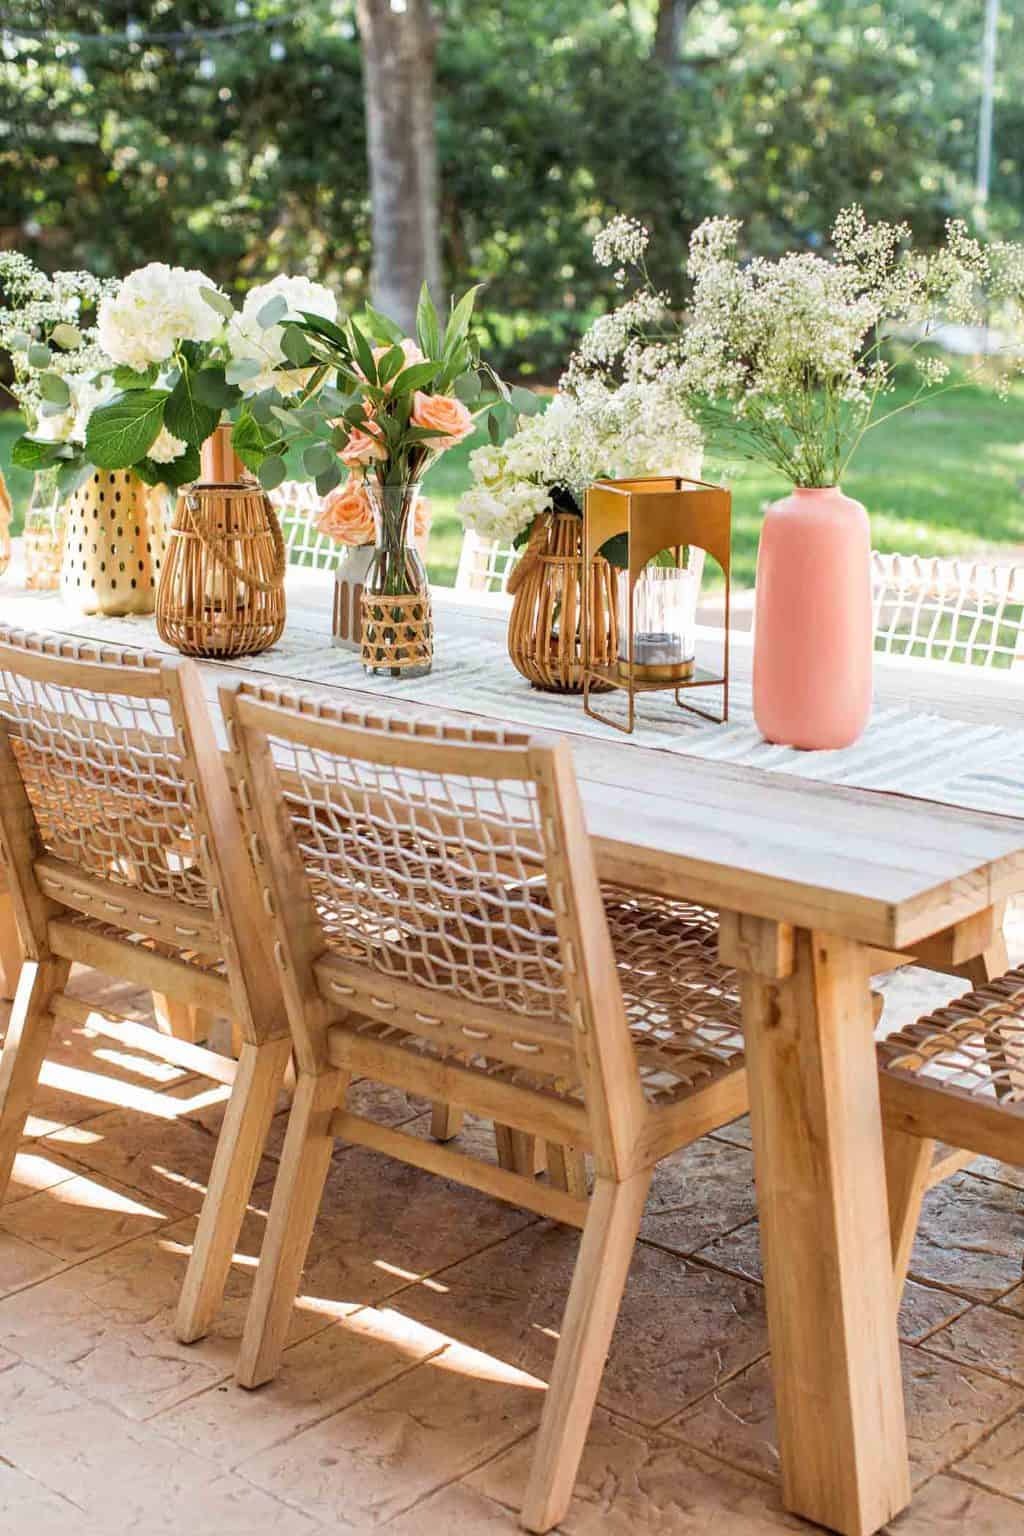 outdoor article dining table and chairs with vases